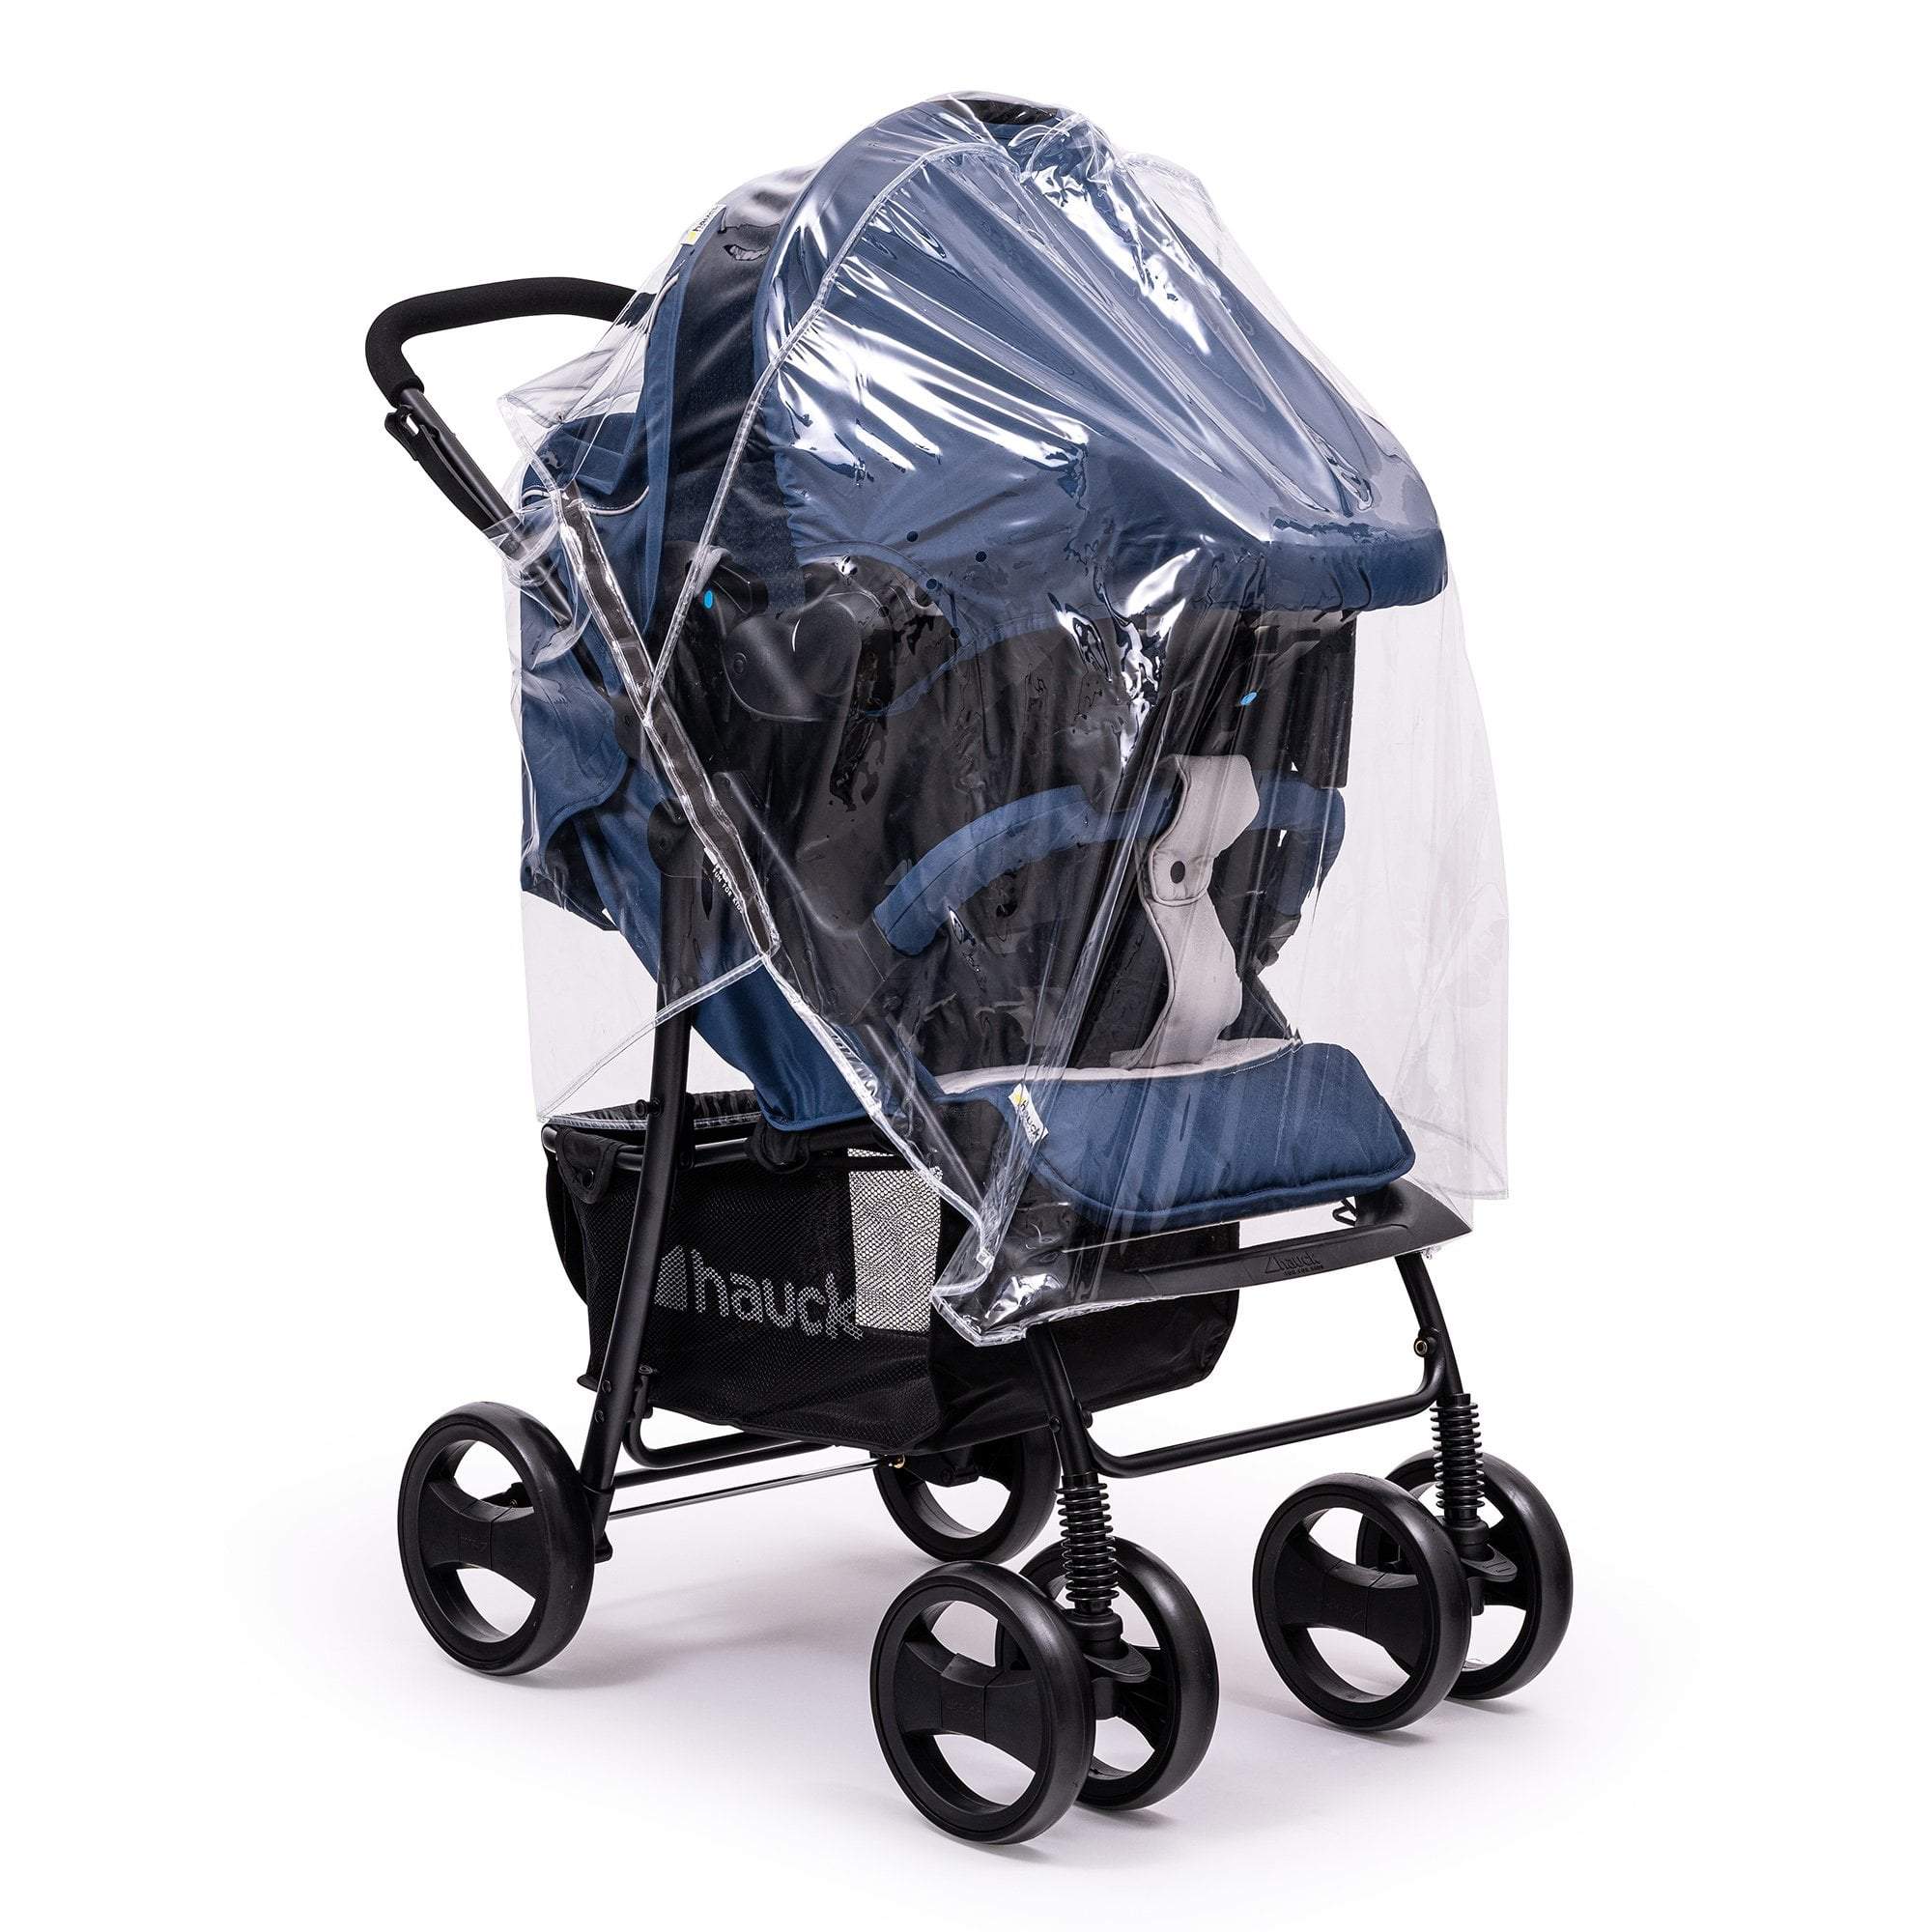 Travel System Raincover Compatible with Bumbleride - Fits All Models -  | For Your Little One